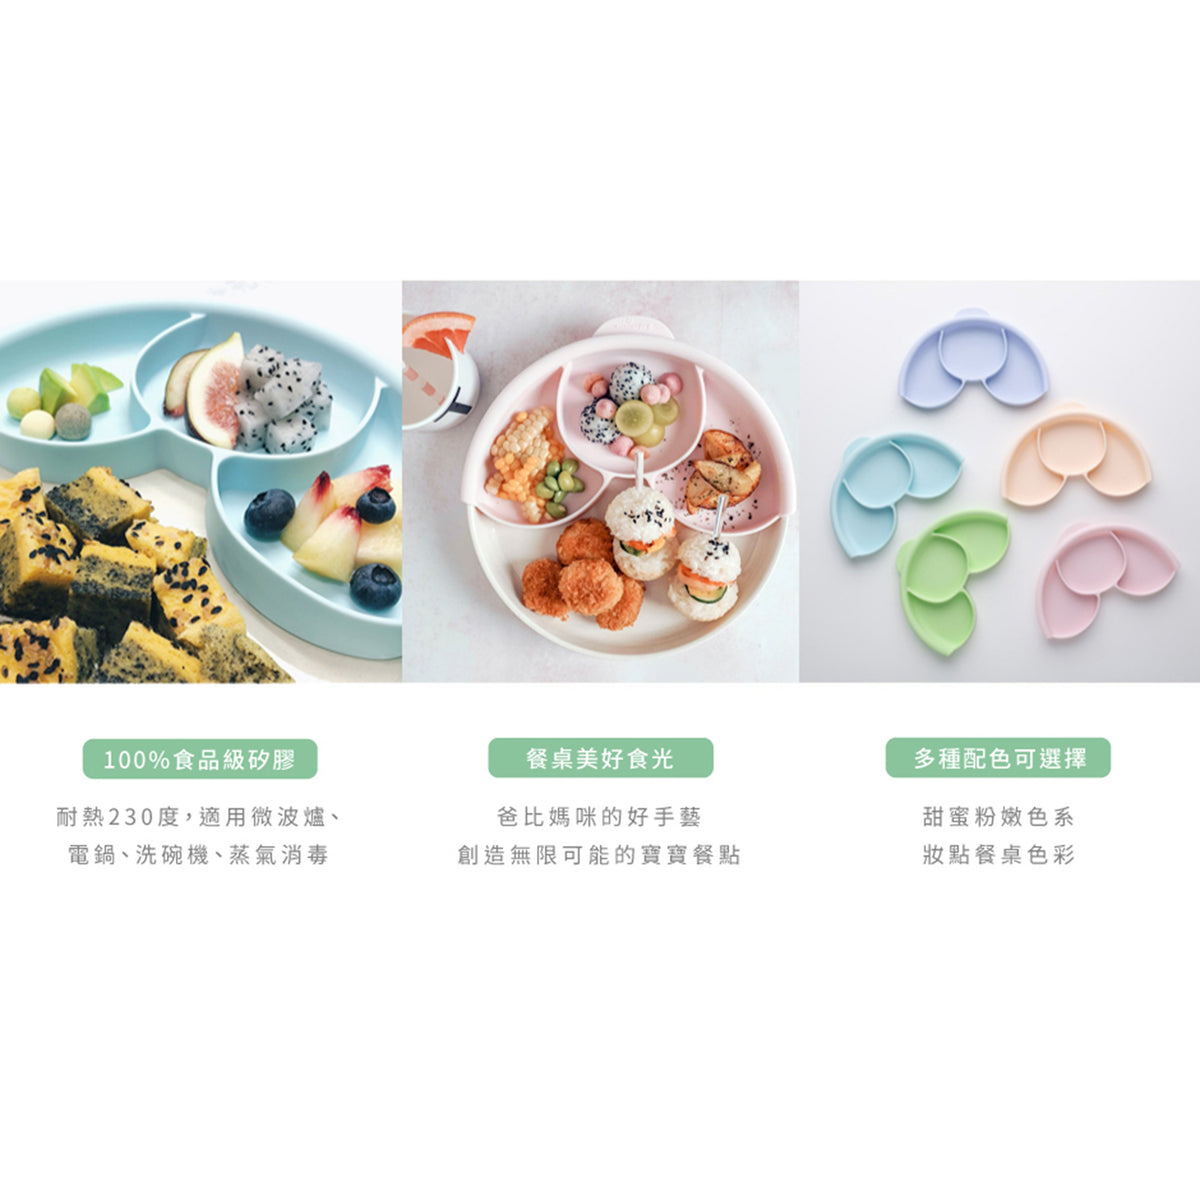 miniware-healthy-meal-set-pla-smart-divider-suction-plate-in-vanilla-+-silicone-divider-in-cotton-candy- (3)